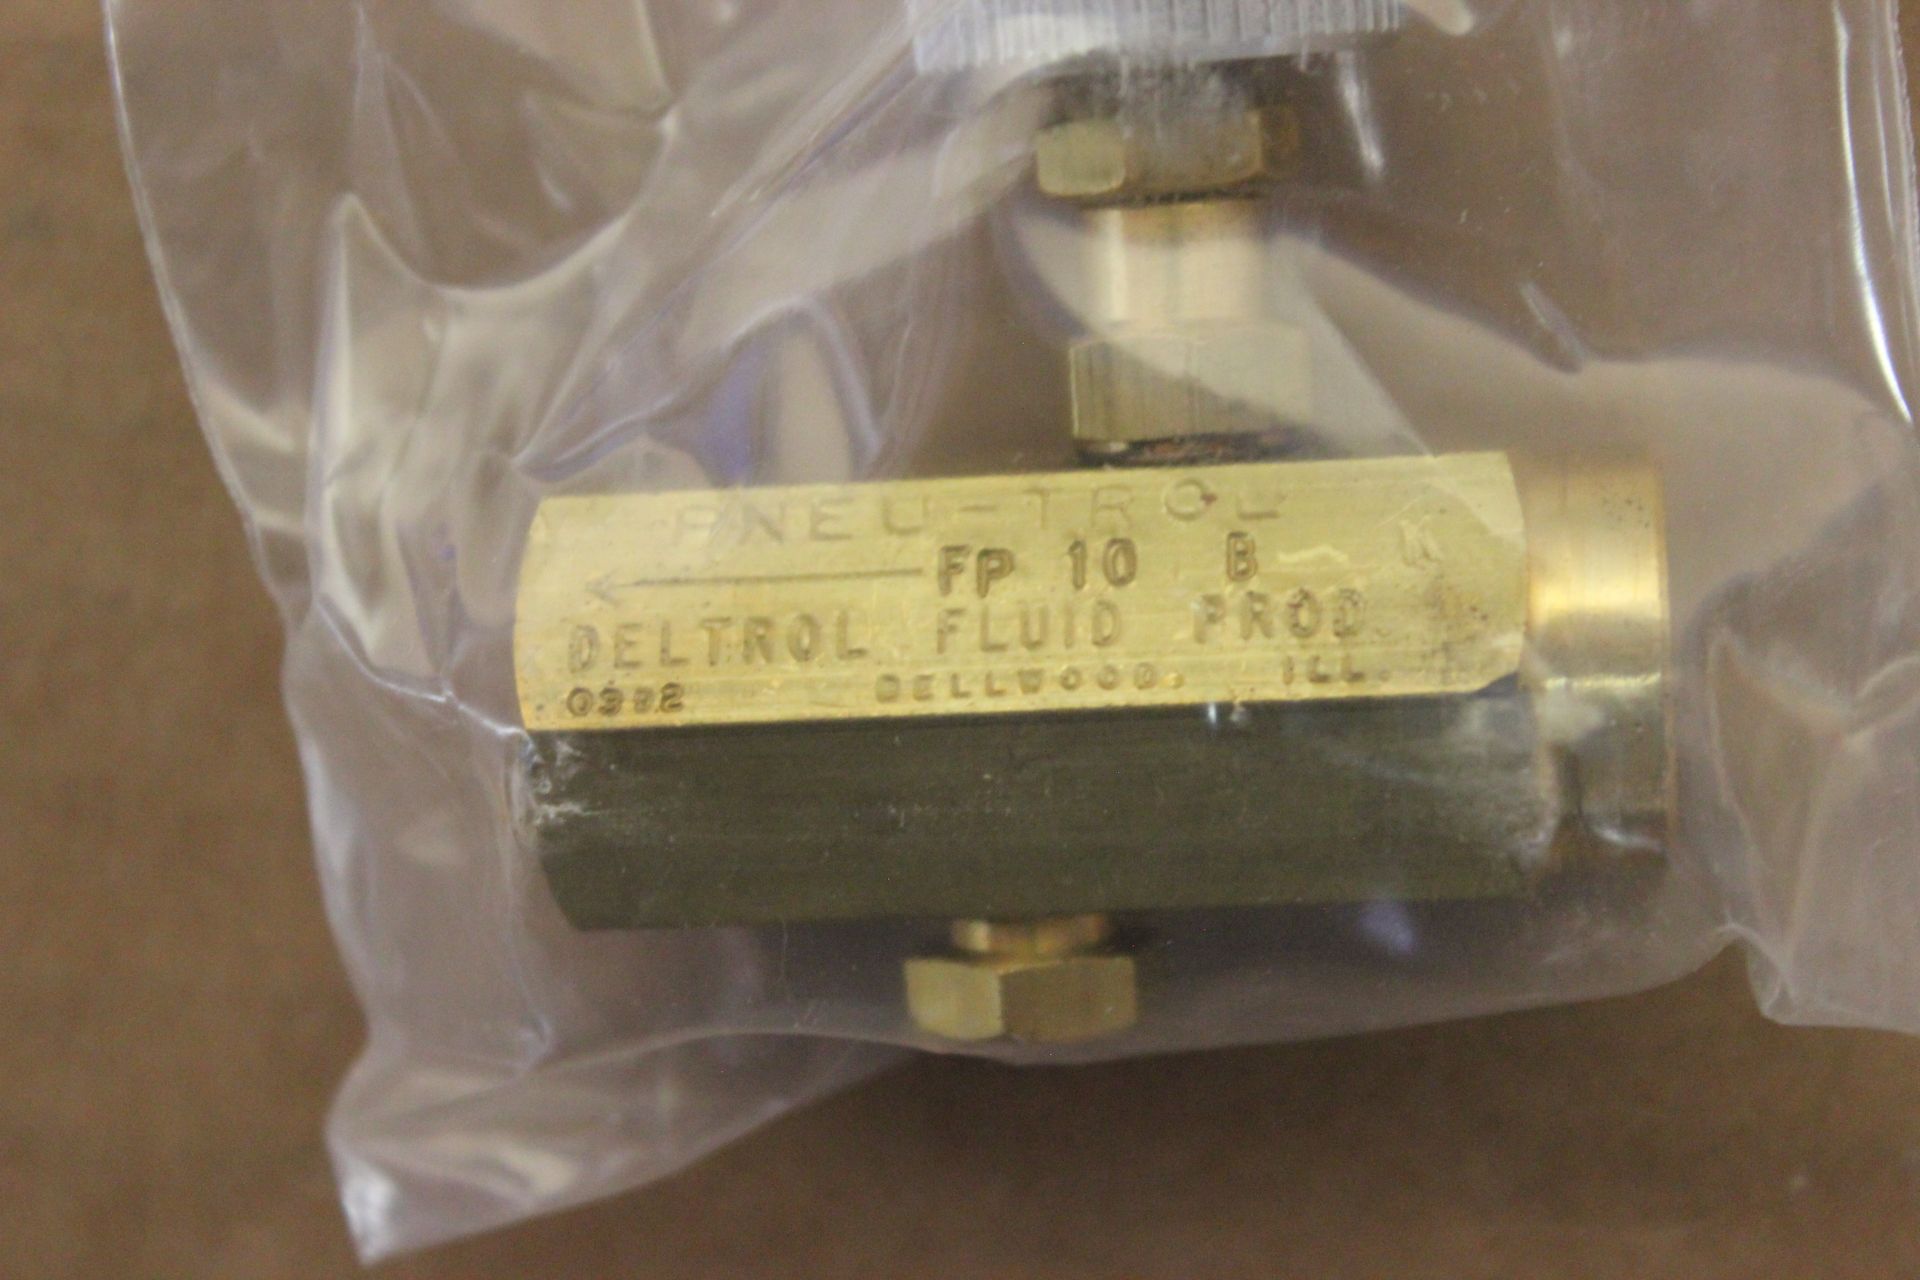 LOT OF 2 NEW DELTROL NEEDLE VALVES - Image 4 of 5